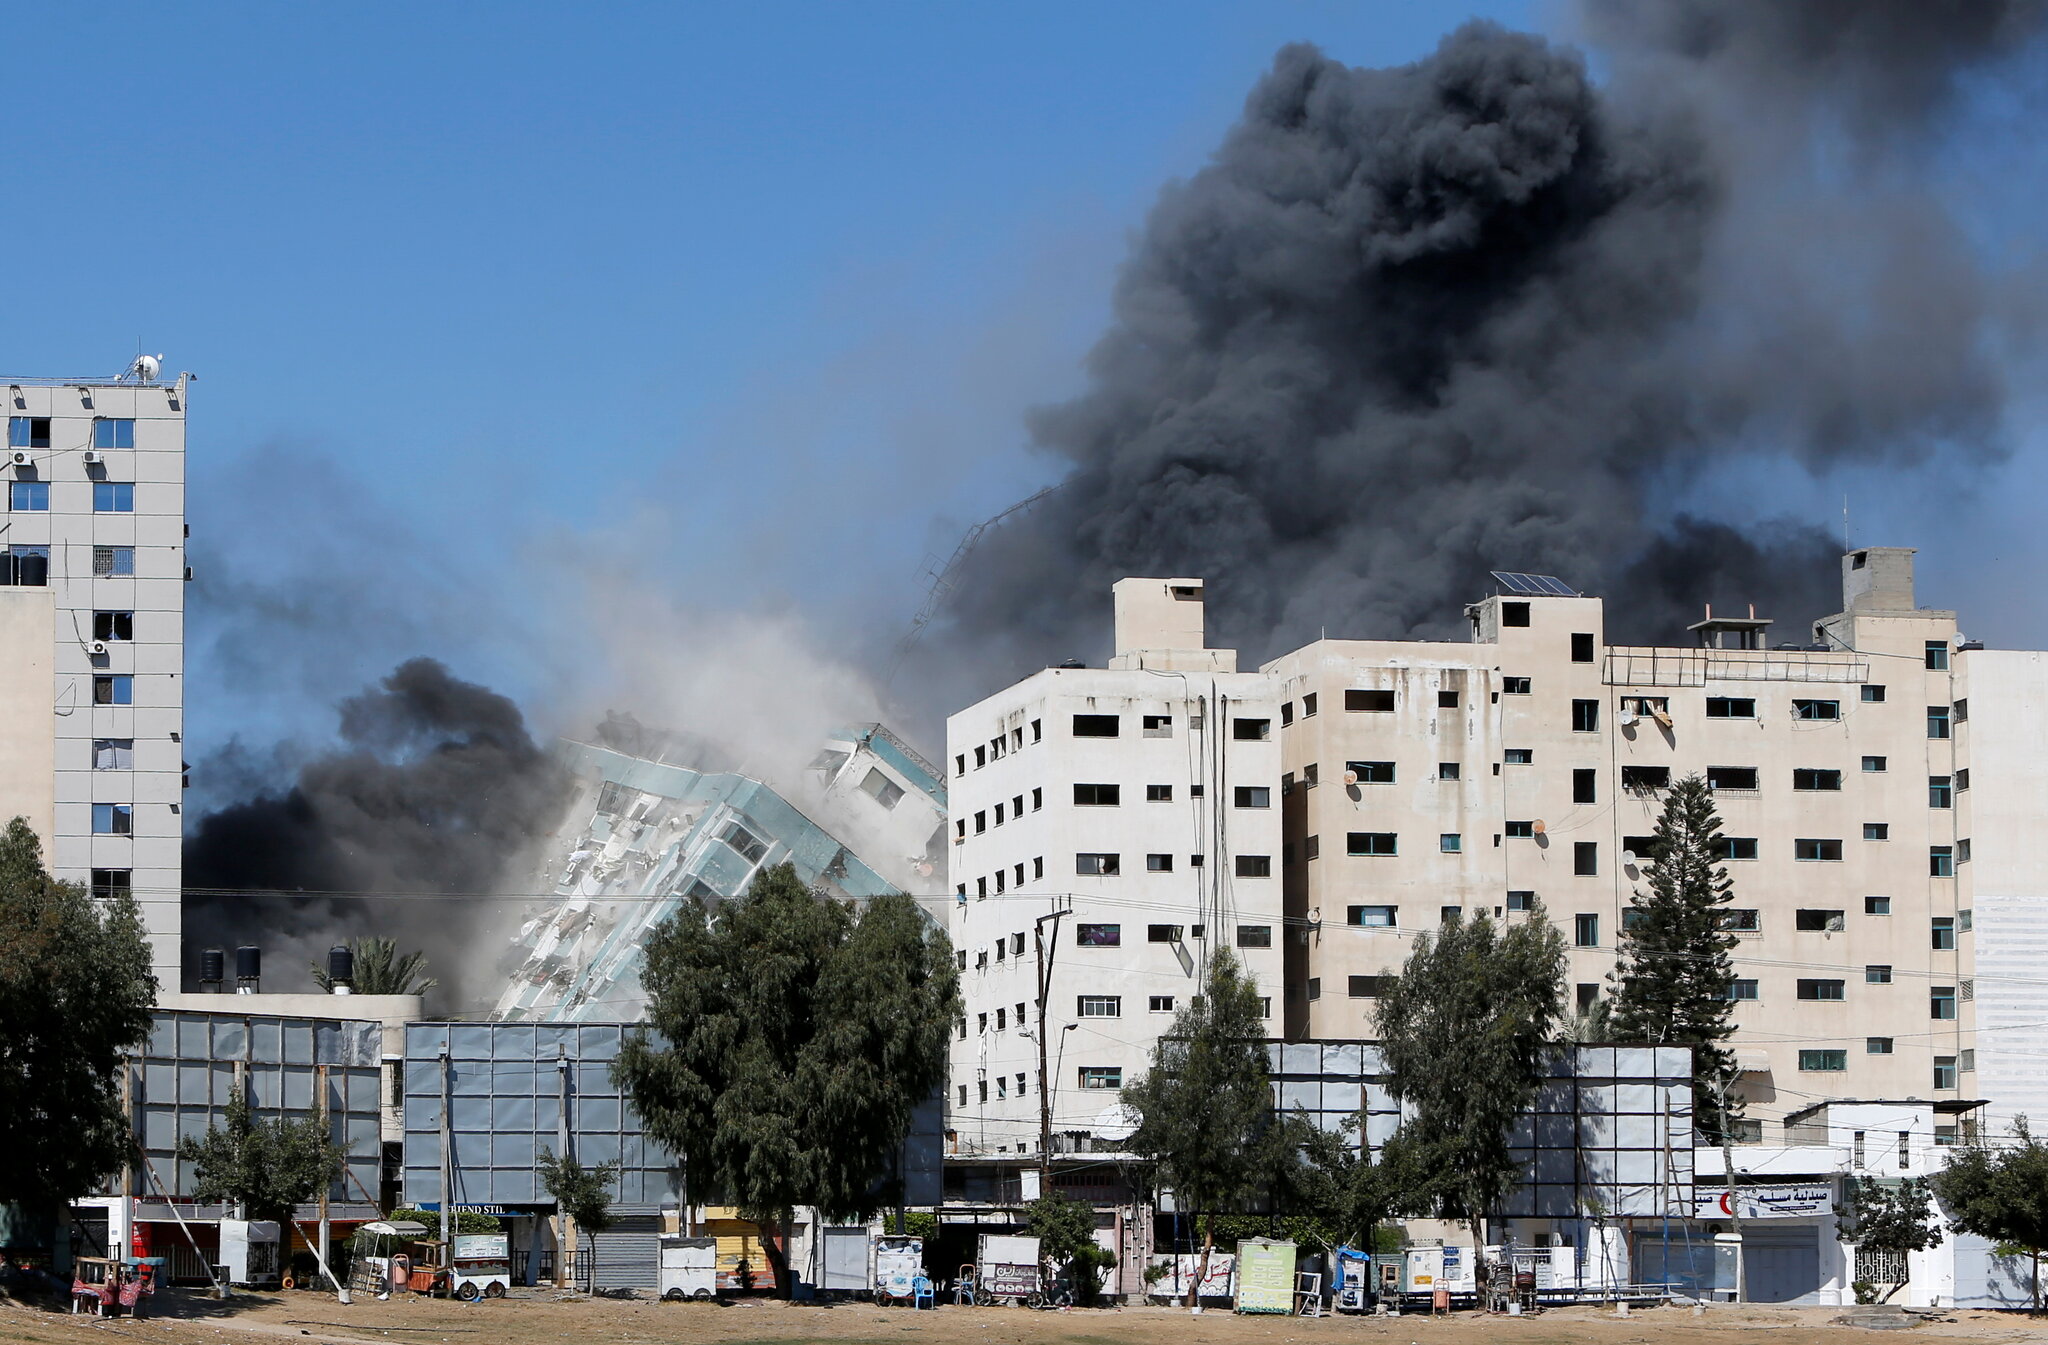 Attack on the AP Building in Gaza (image from @KenRoth on Twitter)